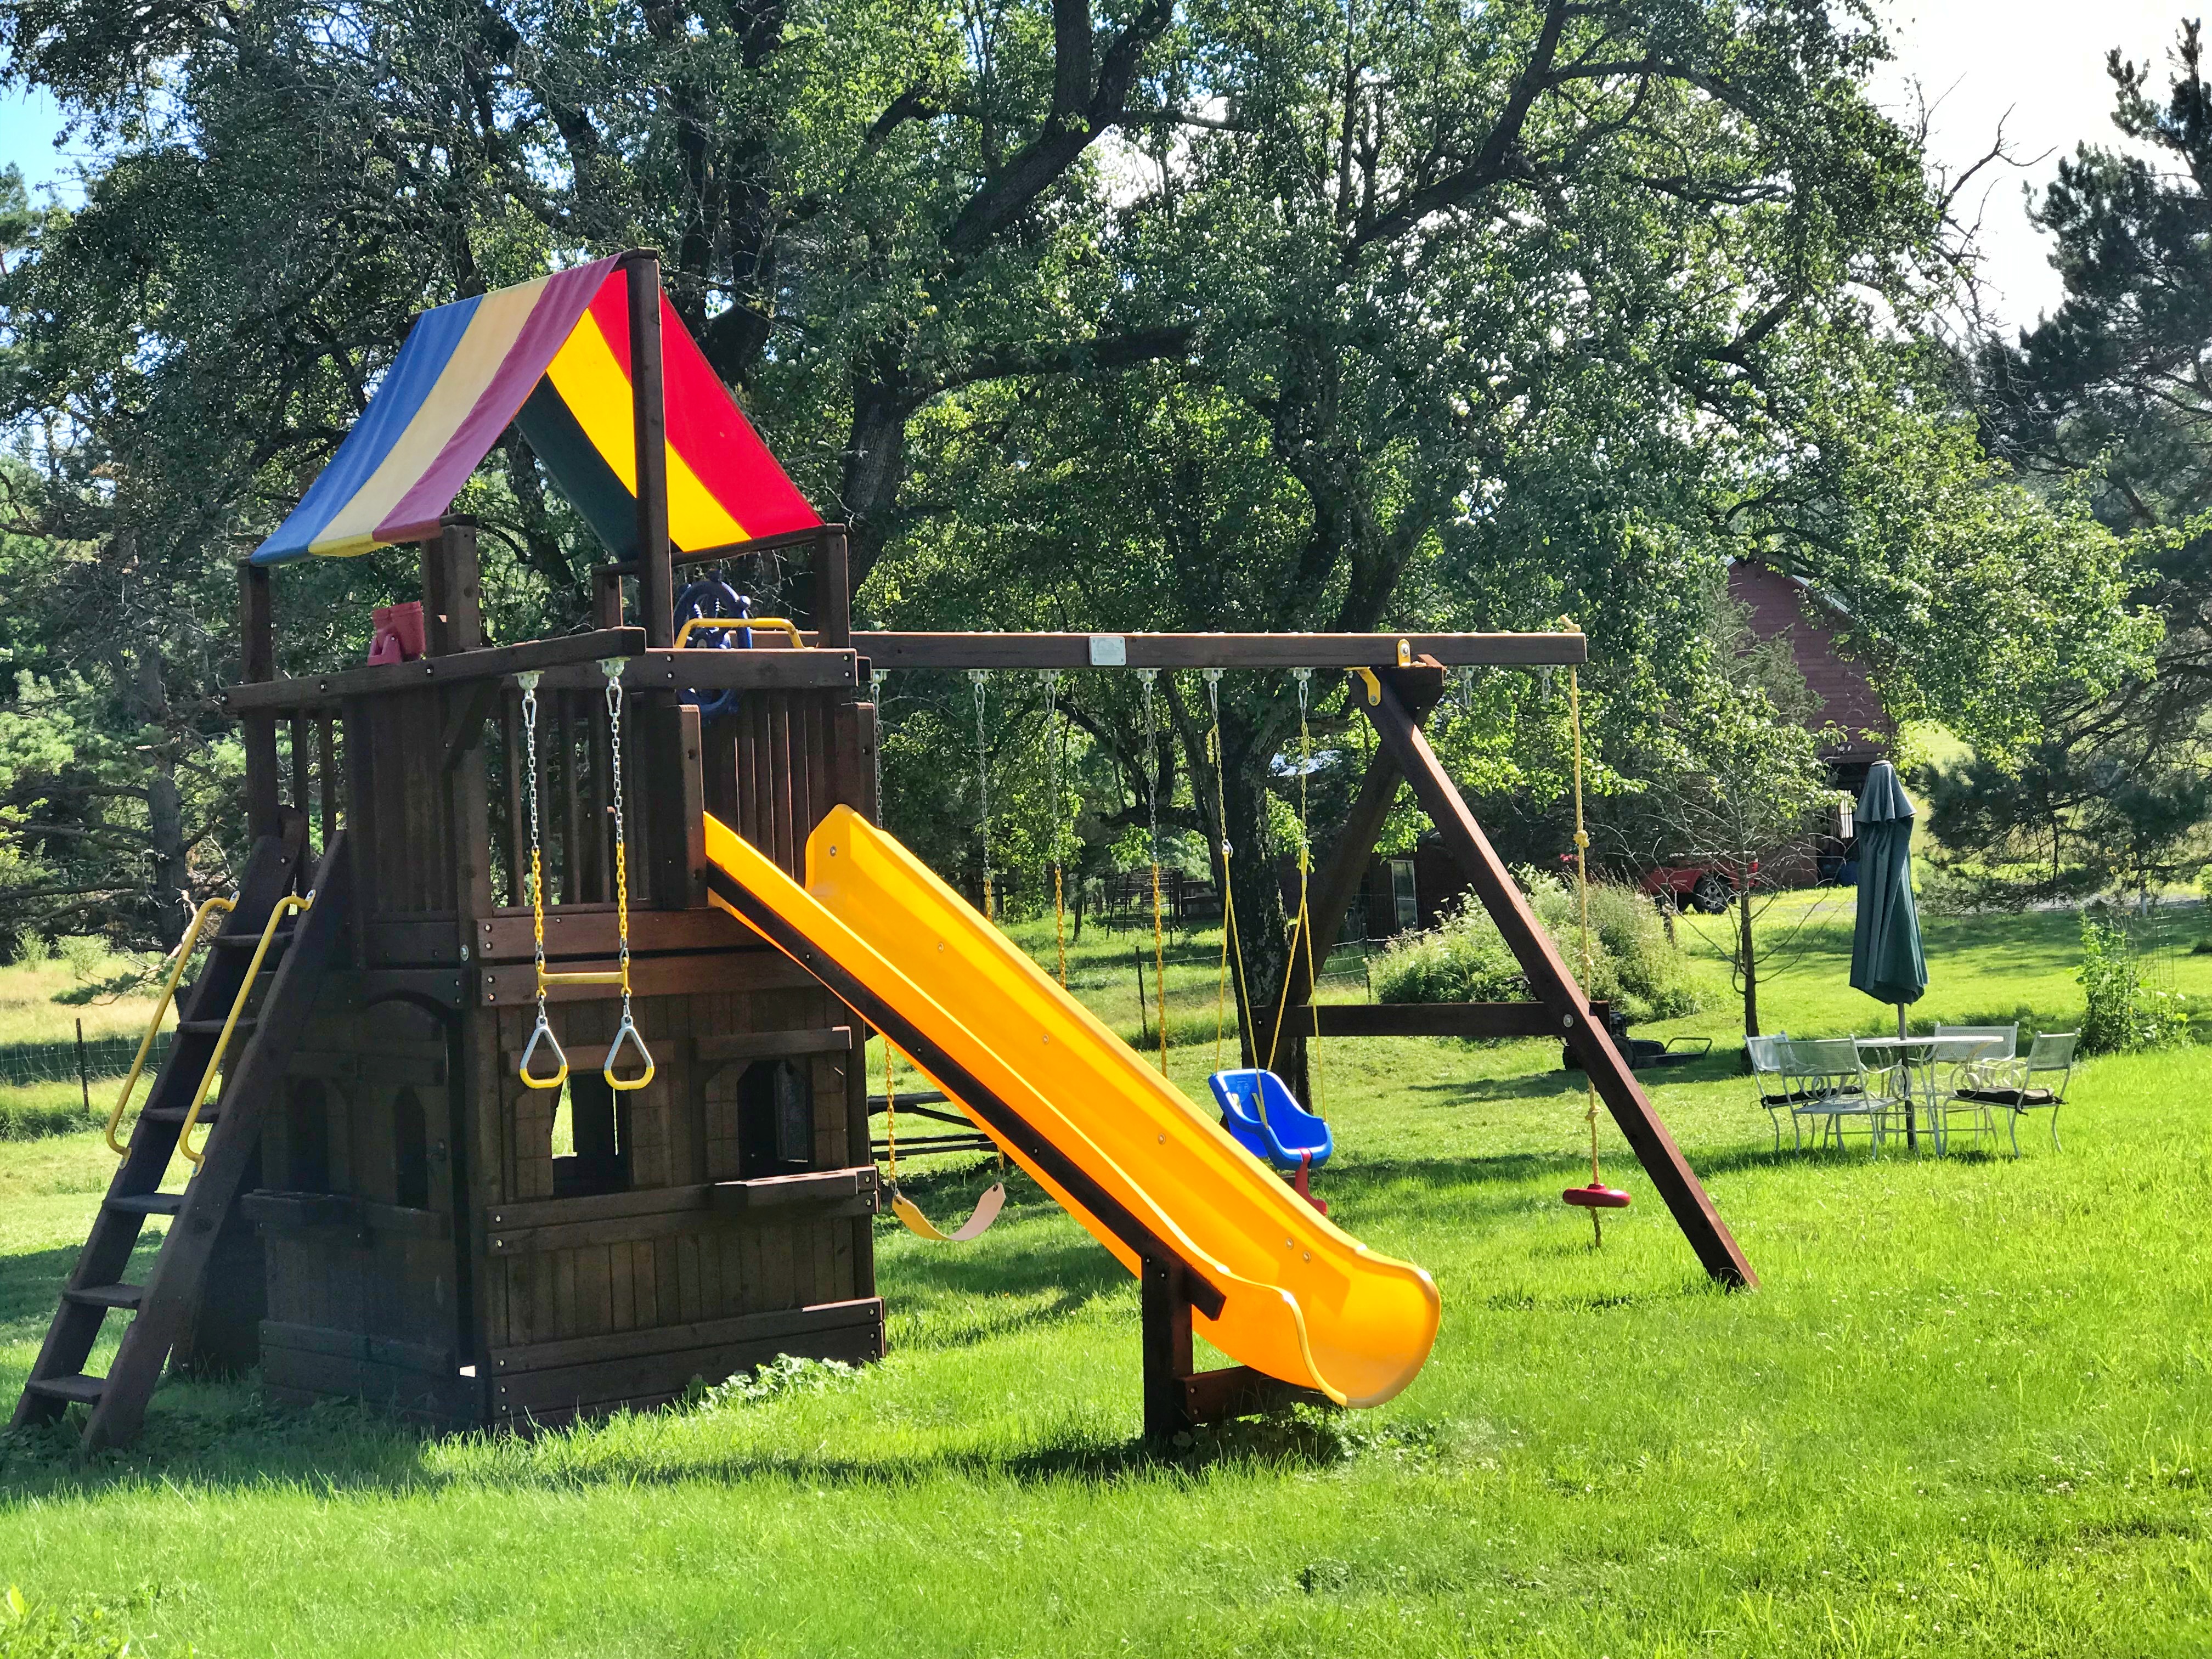 Our unvaccinated grandchildren gather with their friends at this playground at New Fadum Farm. Surely, we should be willing to wear our masks again indoors to protect them!